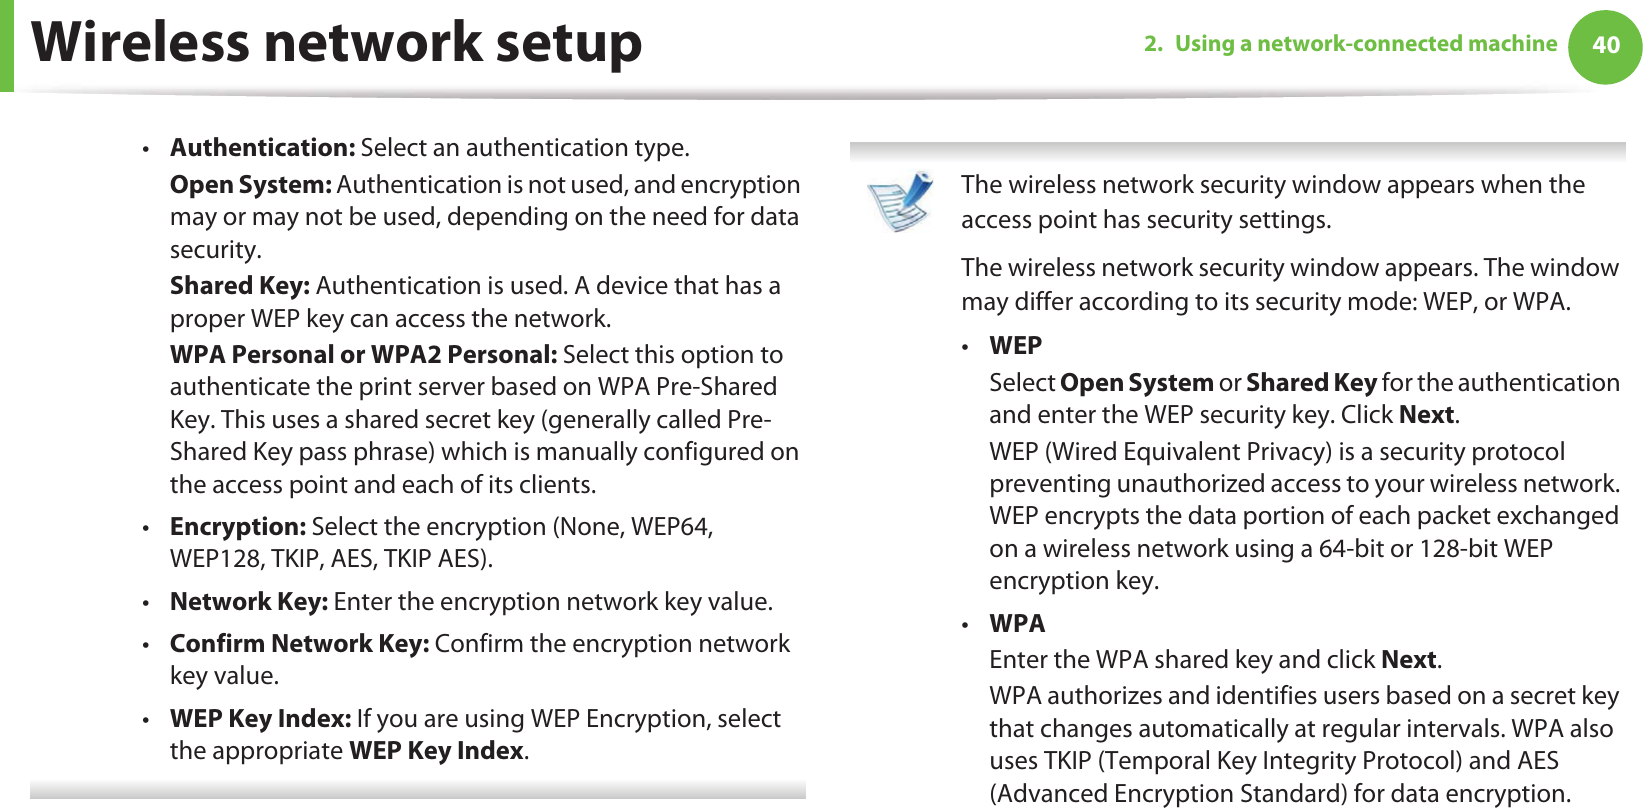 Wireless network setup 402. Using a network-connected machine•Authentication: Select an authentication type.Open System: Authentication is not used, and encryption may or may not be used, depending on the need for data security.Shared Key: Authentication is used. A device that has a proper WEP key can access the network.WPA Personal or WPA2 Personal: Select this option to authenticate the print server based on WPA Pre-Shared Key. This uses a shared secret key (generally called Pre- Shared Key pass phrase) which is manually configured on the access point and each of its clients.•Encryption: Select the encryption (None, WEP64, WEP128, TKIP, AES, TKIP AES).•Network Key: Enter the encryption network key value.•Confirm Network Key: Confirm the encryption network key value.•WEP Key Index: If you are using WEP Encryption, select the appropriate WEP Key Index.  The wireless network security window appears when the access point has security settings.The wireless network security window appears. The window may differ according to its security mode: WEP, or WPA.•WEPSelect Open System or Shared Key for the authentication and enter the WEP security key. Click Next.WEP (Wired Equivalent Privacy) is a security protocol preventing unauthorized access to your wireless network. WEP encrypts the data portion of each packet exchanged on a wireless network using a 64-bit or 128-bit WEP encryption key.•WPAEnter the WPA shared key and click Next.WPA authorizes and identifies users based on a secret key that changes automatically at regular intervals. WPA also uses TKIP (Temporal Key Integrity Protocol) and AES (Advanced Encryption Standard) for data encryption. 